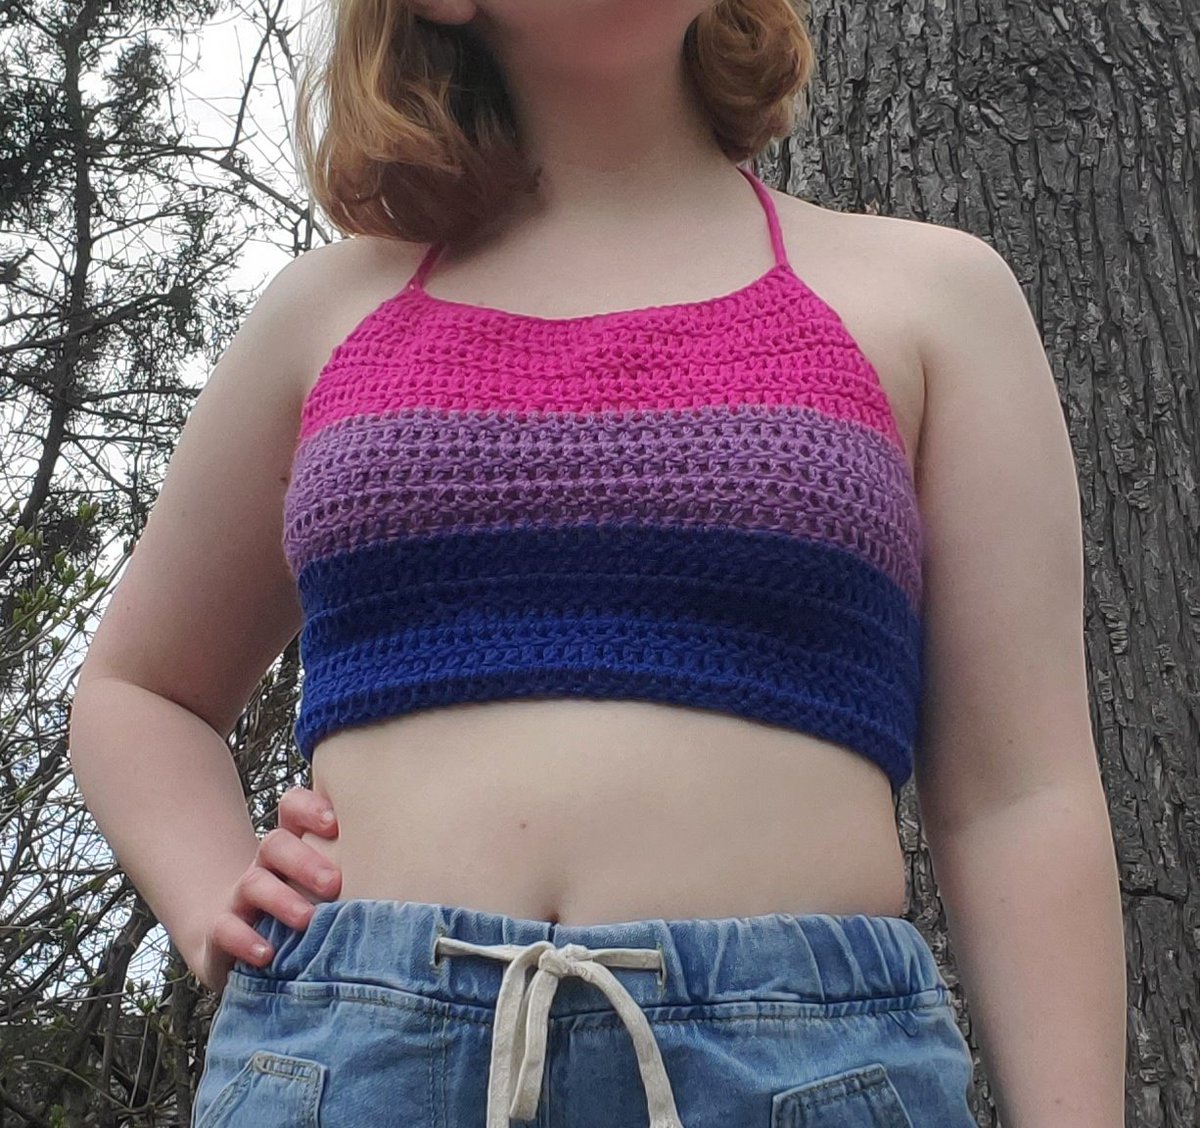 bisexual pride flag halter$20 + $5 shippingsize mediummodel wears size 32Dlaces up in back and around neck for flexible sizing